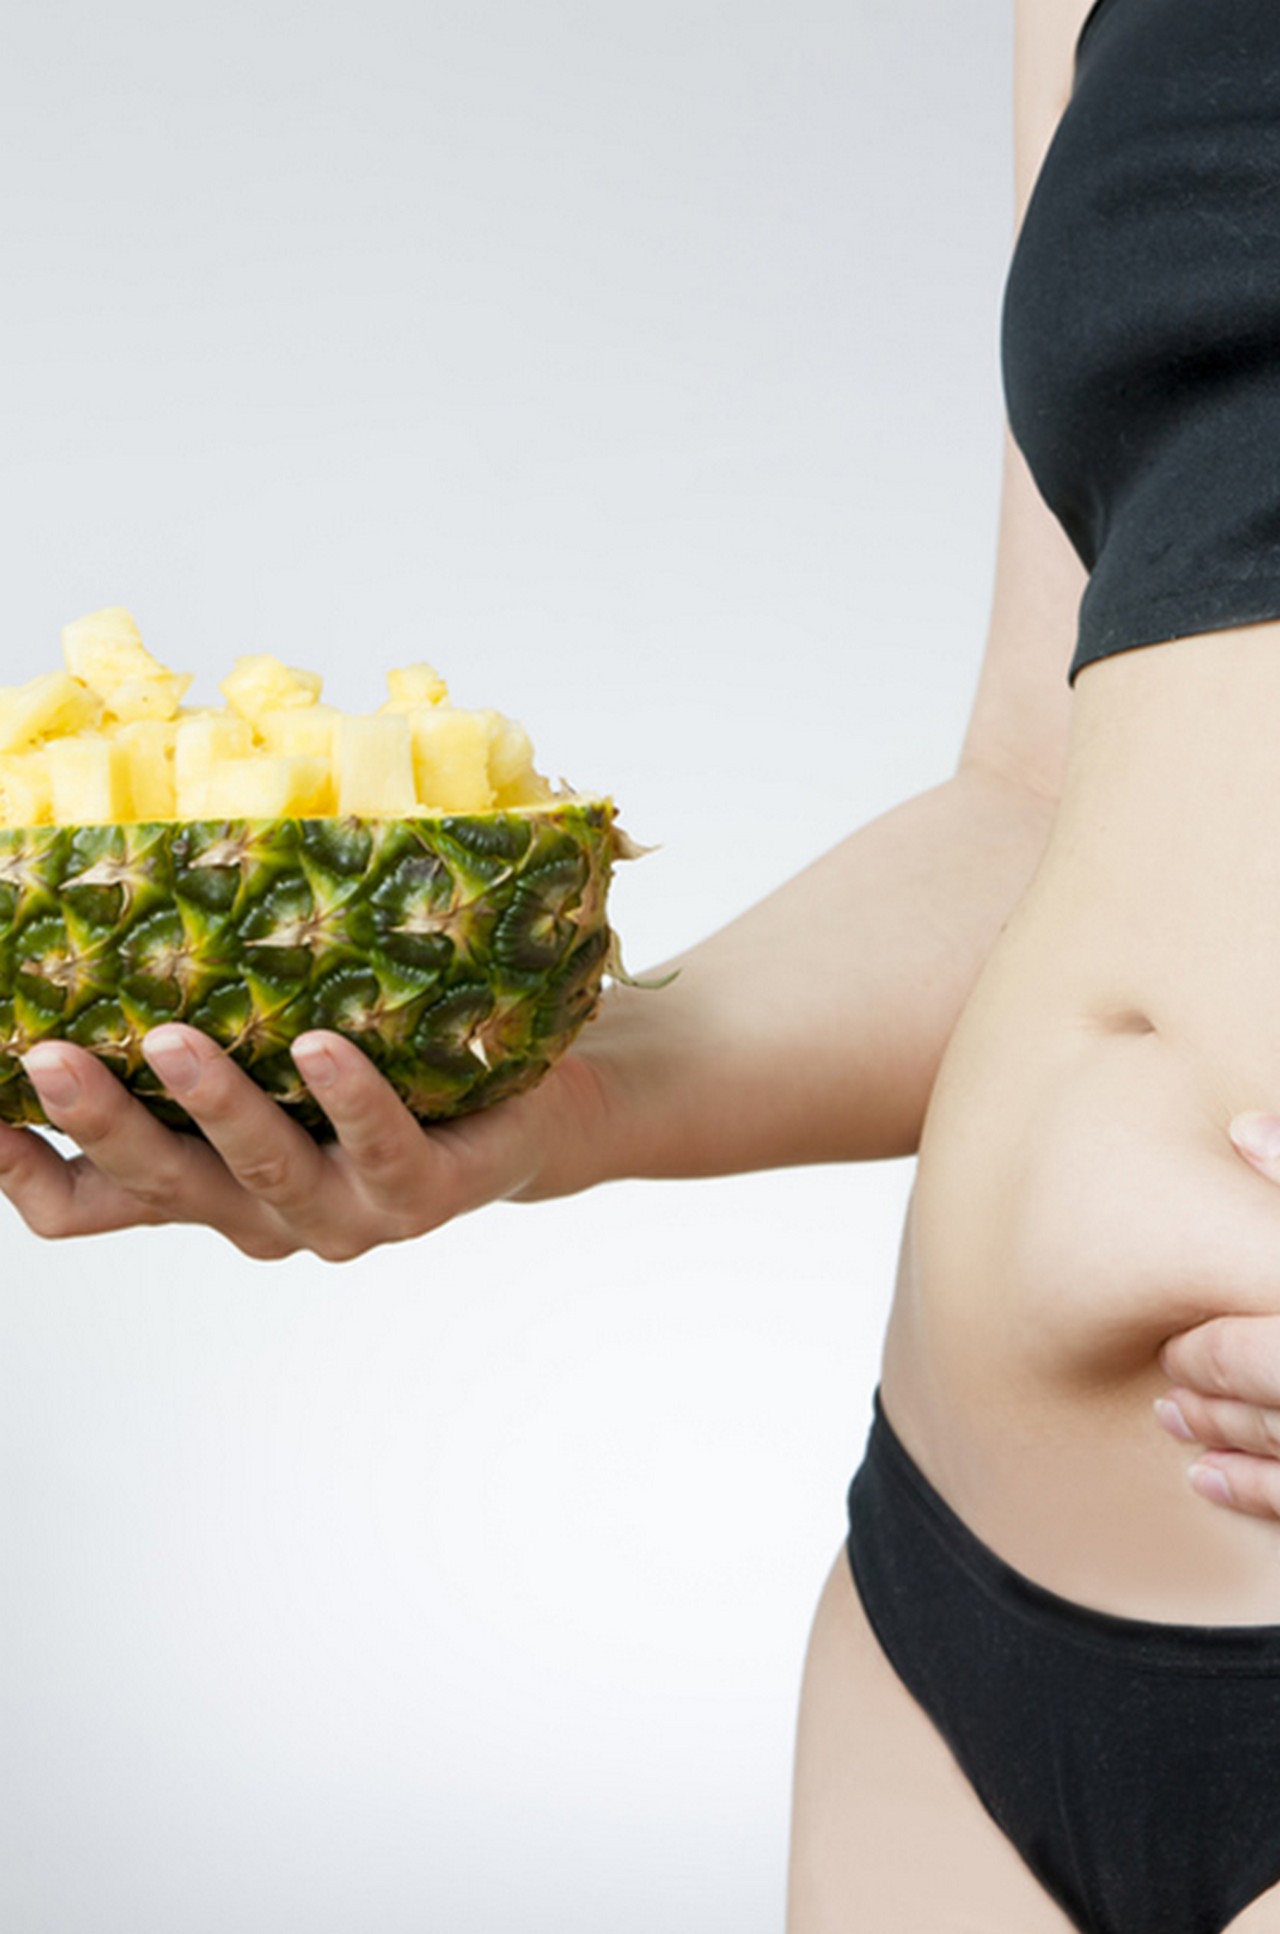  Pineapple For Weight Loss – 7 Best Reasons To Include It In Your Diet